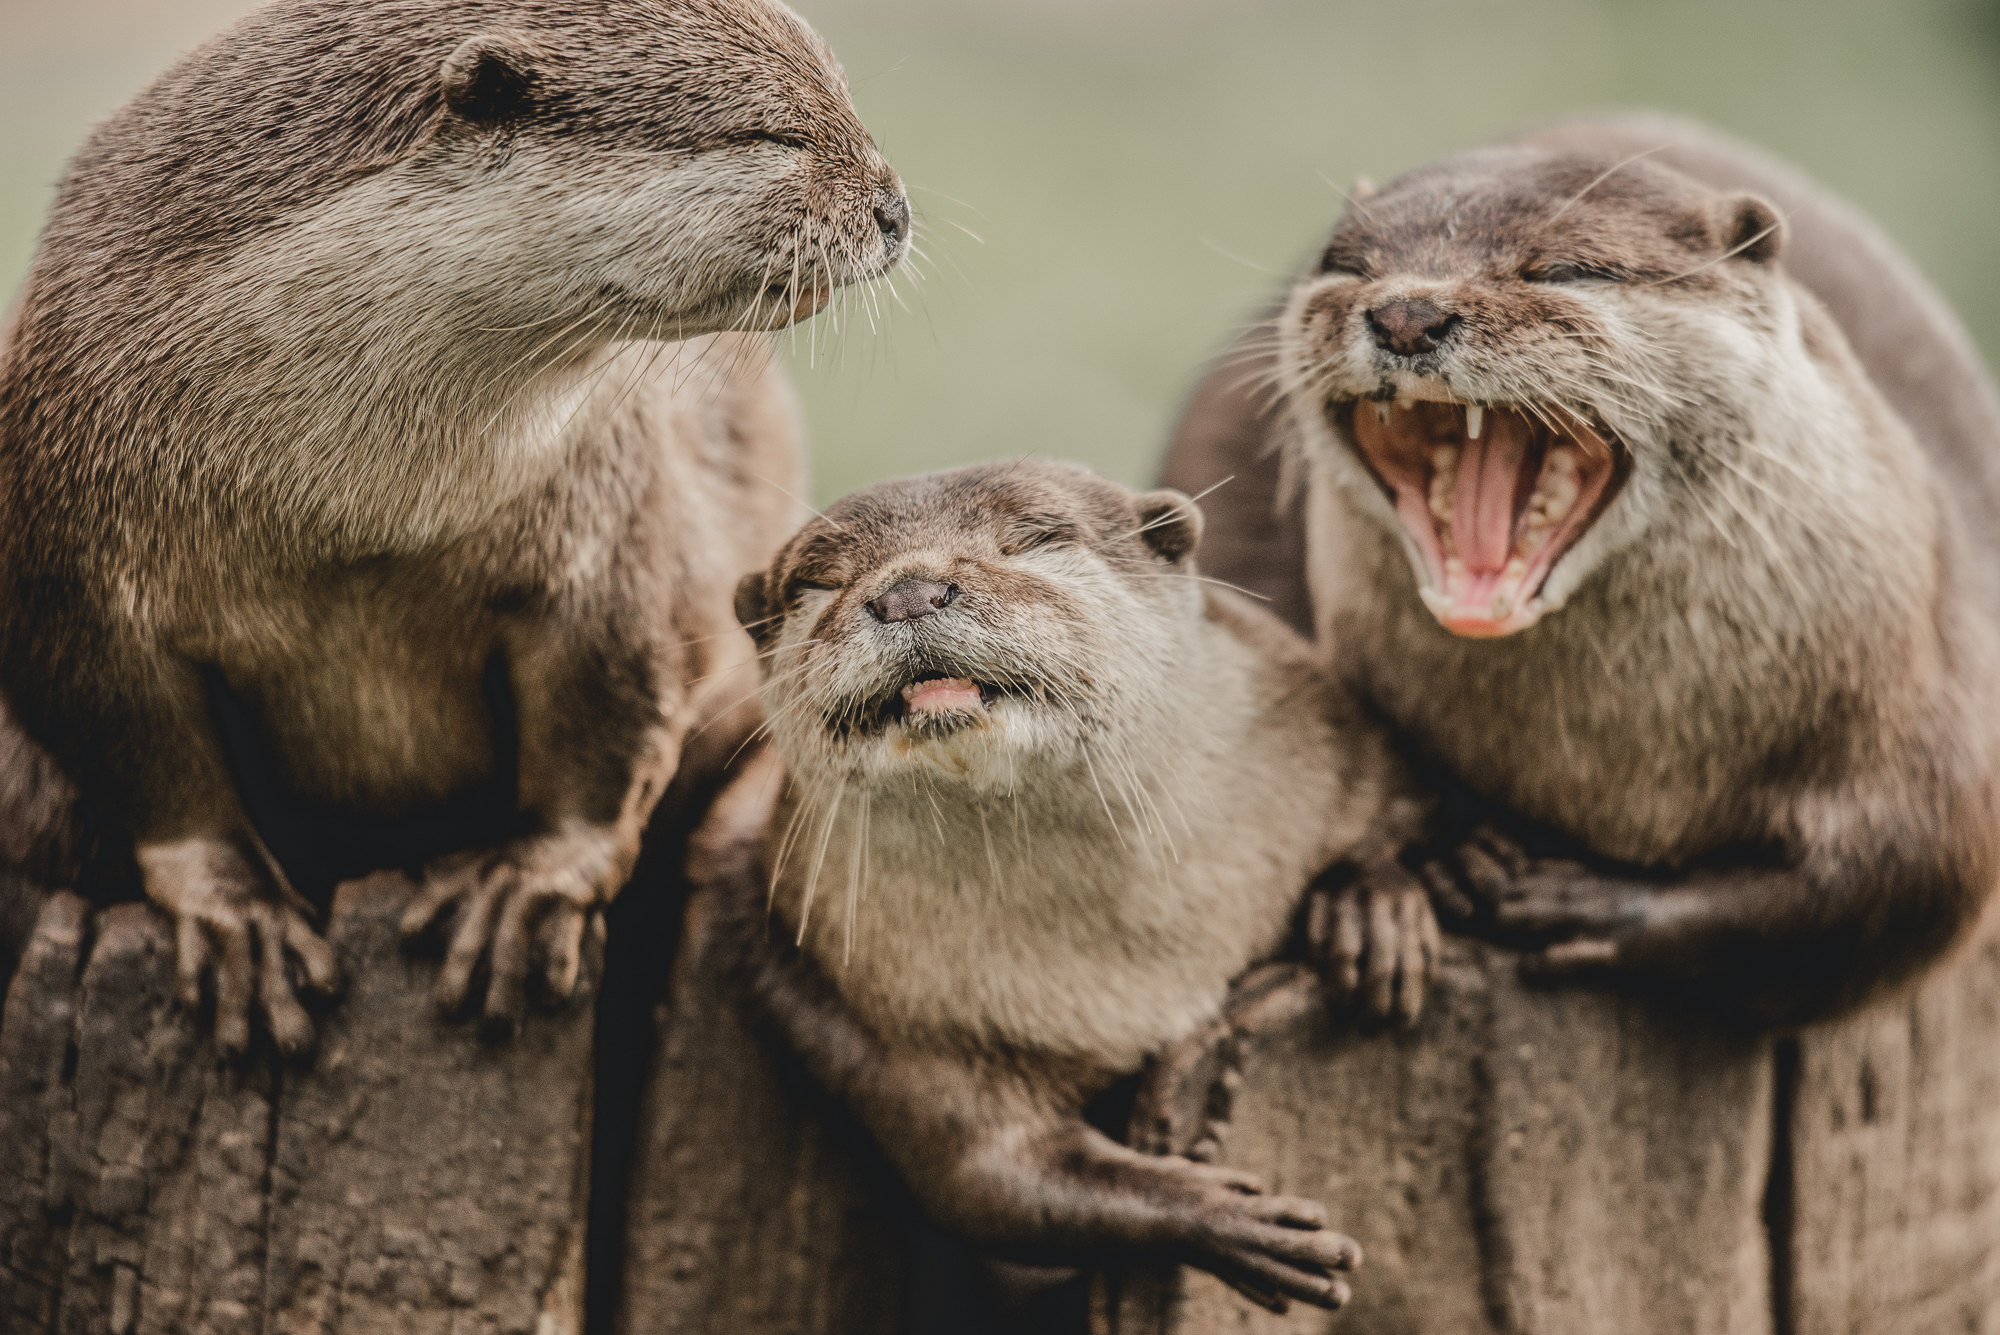 Three otters sitting together